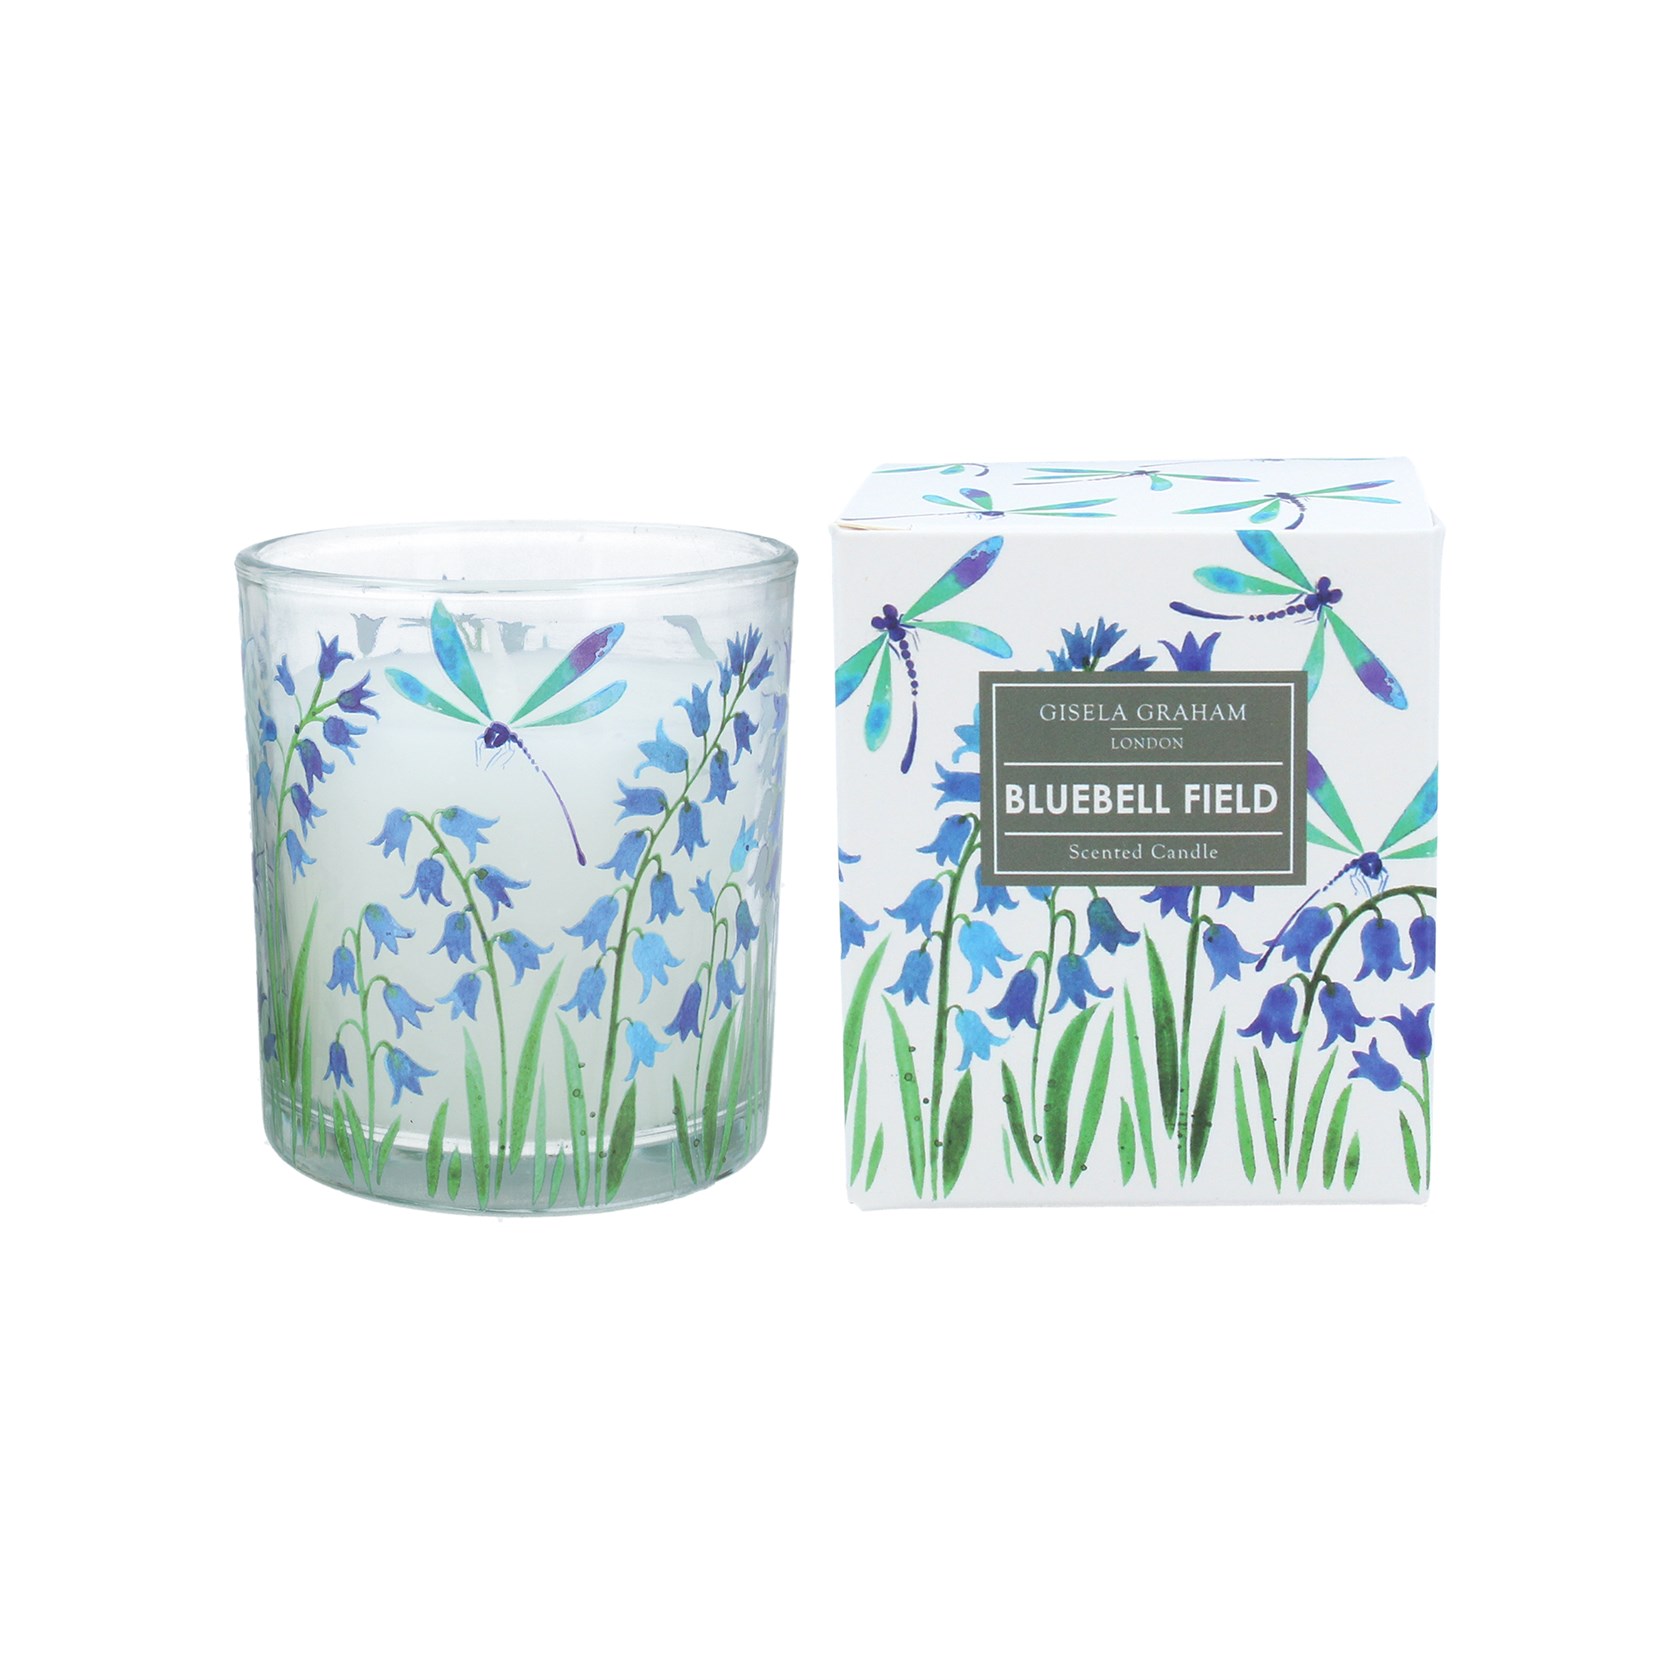 Gisela Graham Bluebell Dragonfly Boxed Candle Pot Sml